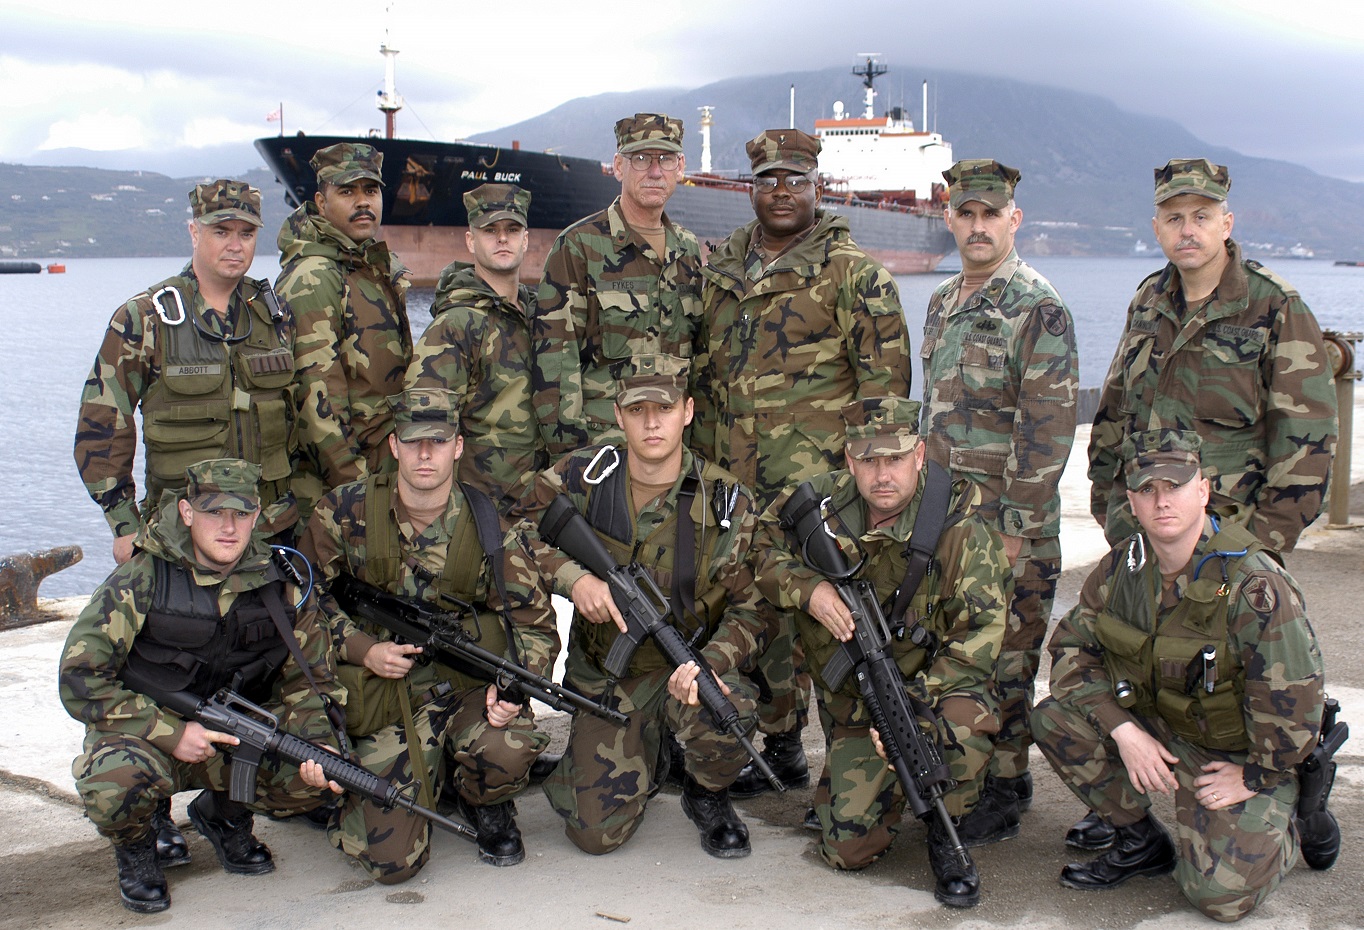 Members of Port Security Unit 309 out of Port Clinton, Ohio, in Italy during Operation Iraqi Freedom. (U.S. Coast Guard)